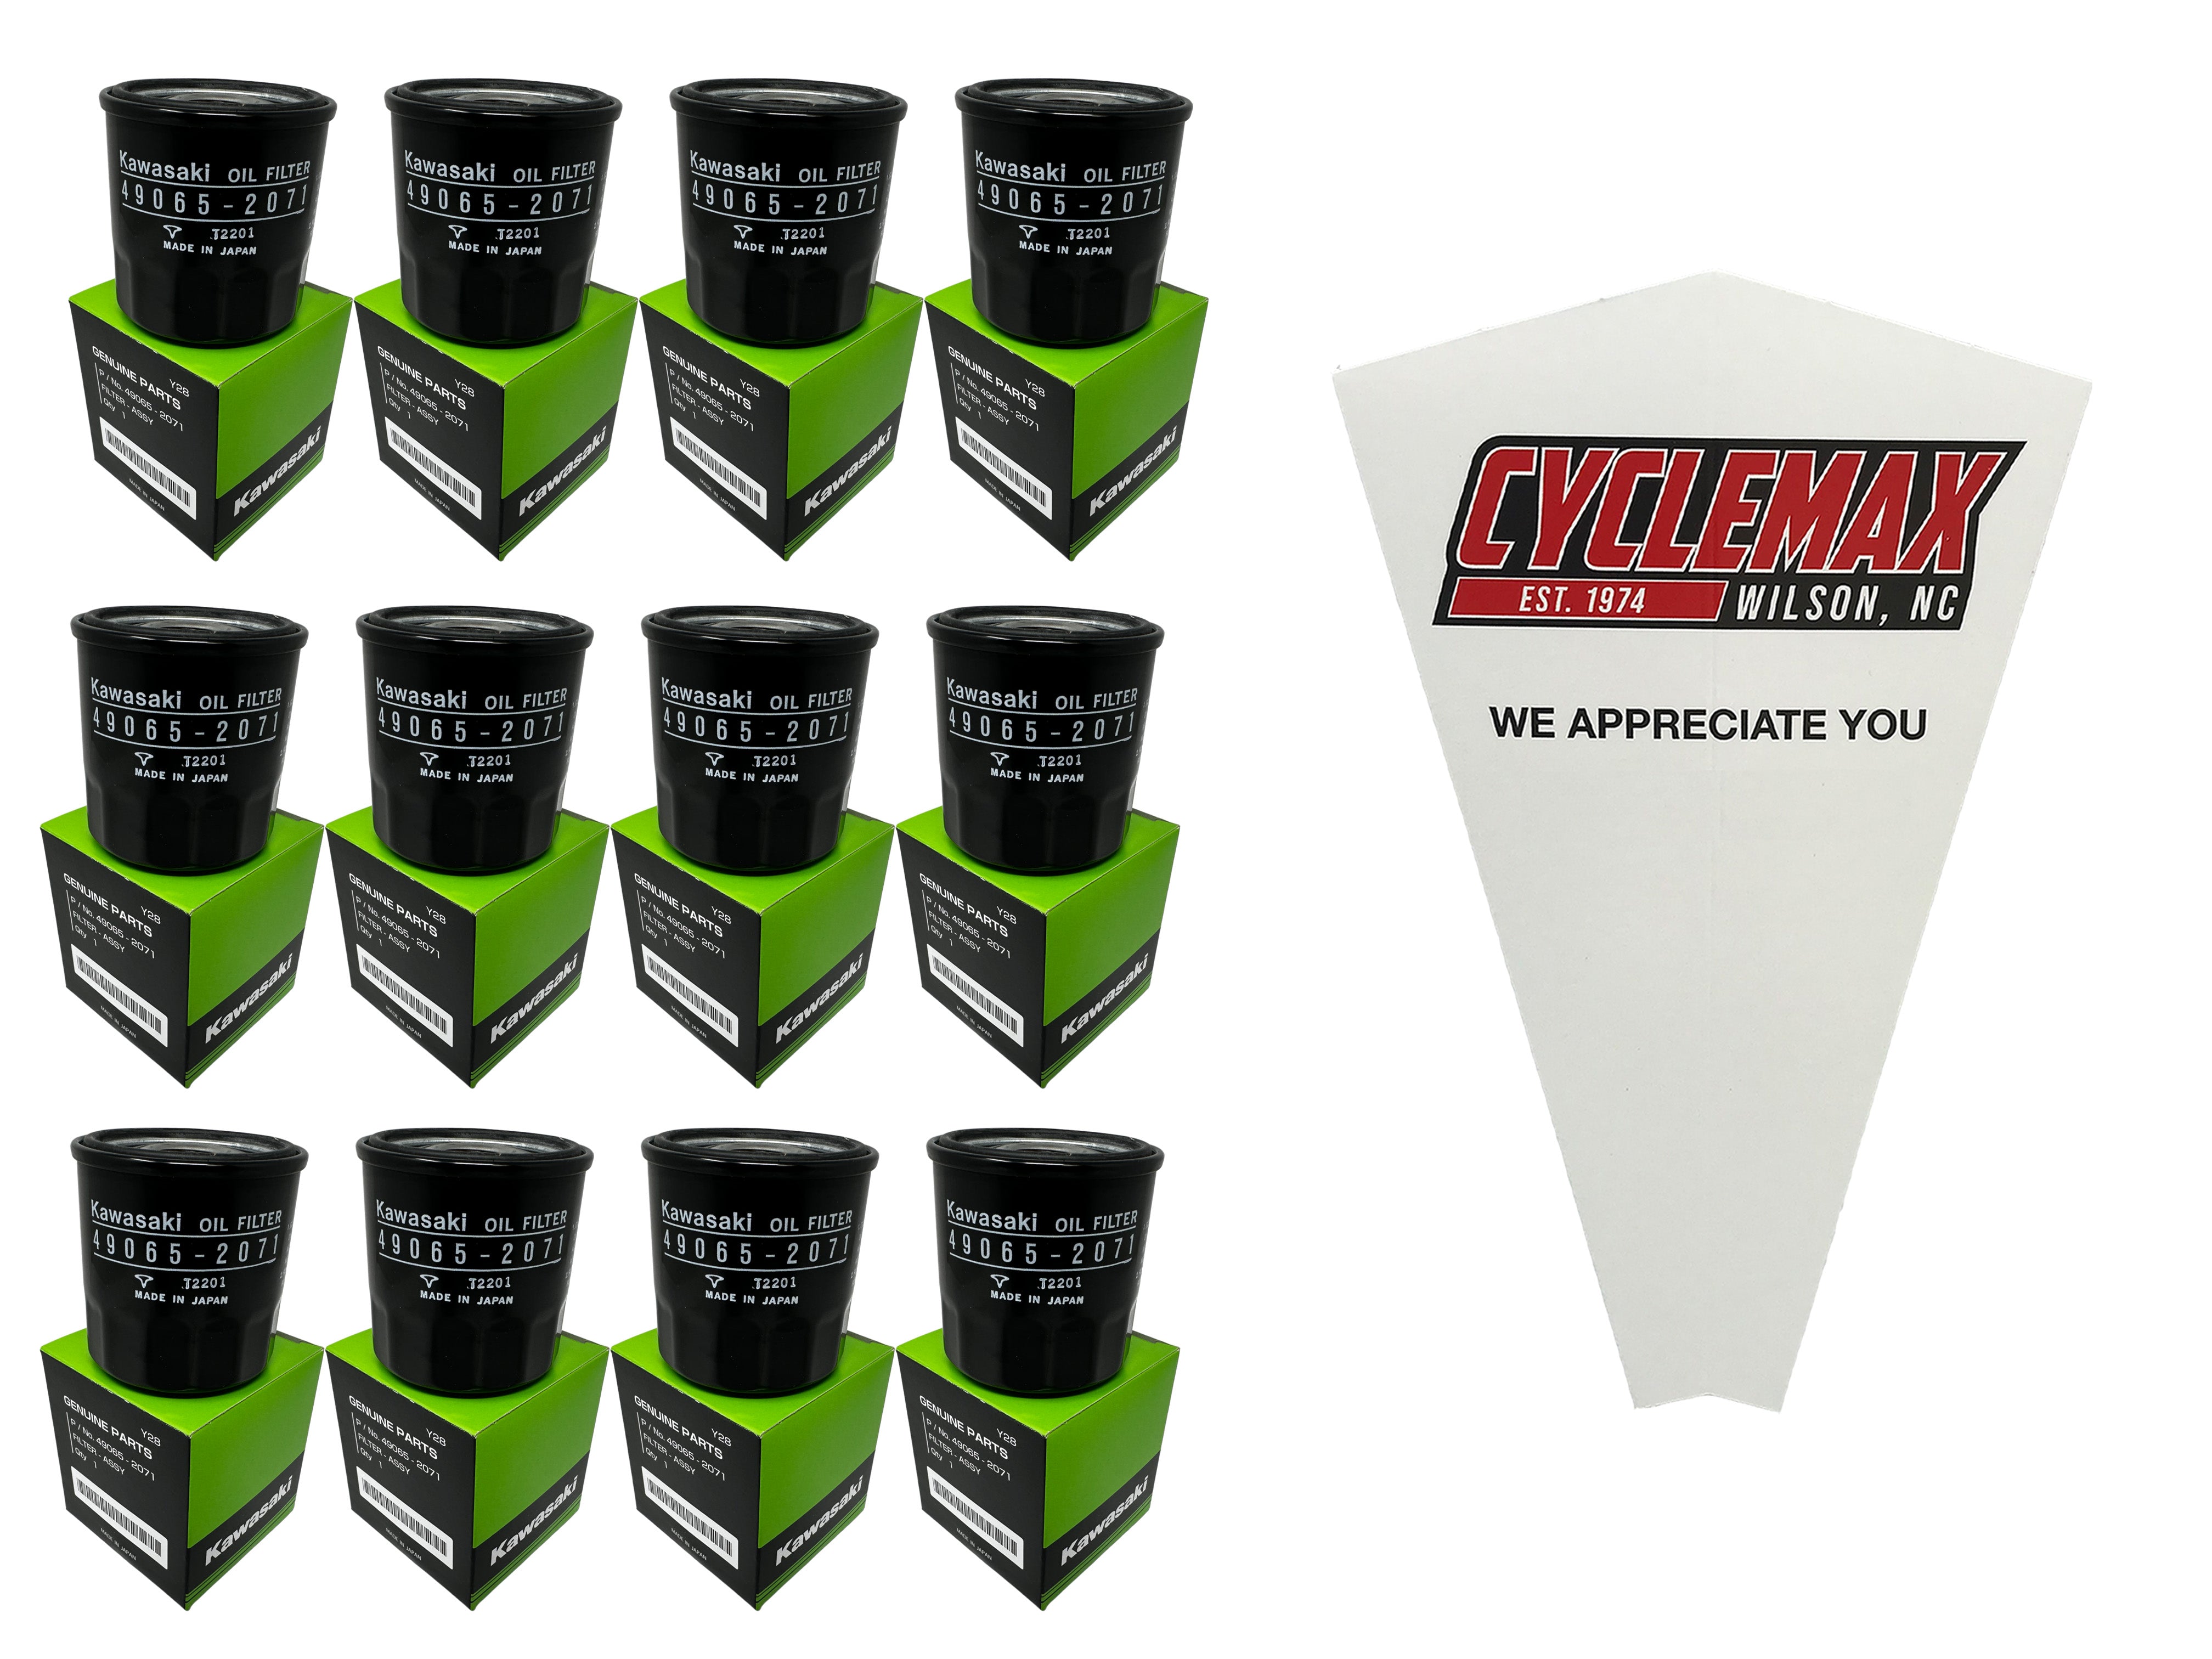 Cyclemax Twelve Pack for Kawasaki Oil Filter 49065-2071 Contains Twelve Filters and a Funnel